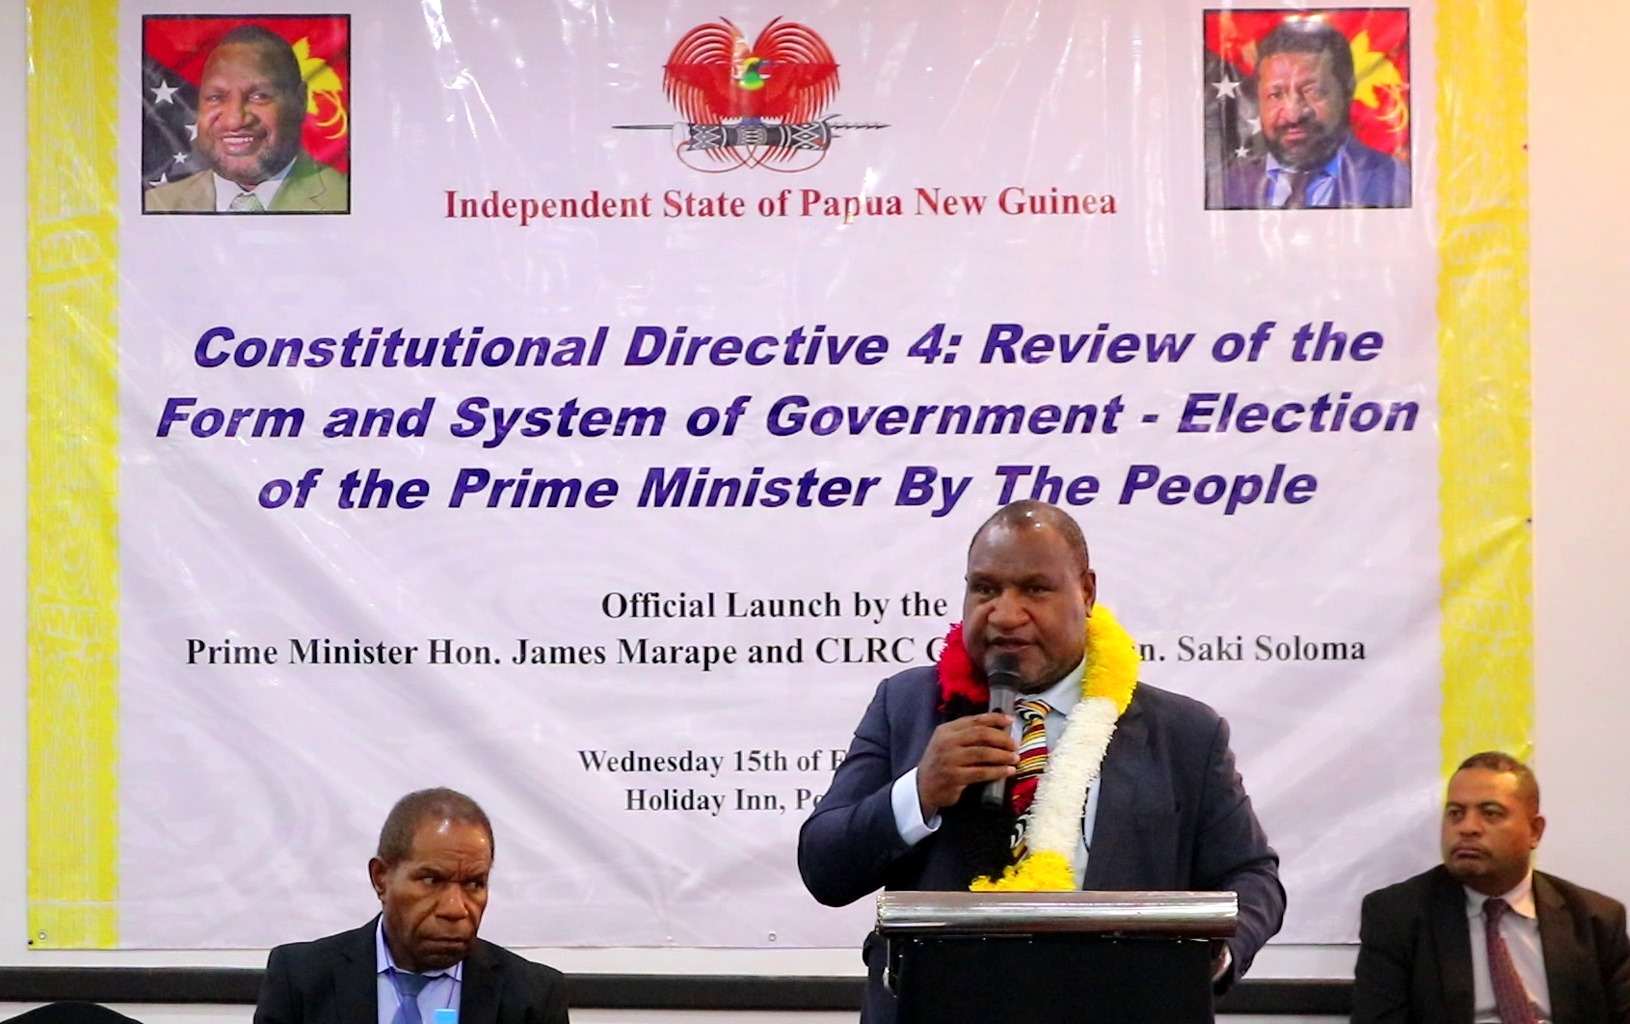 Prime Minister James Marape launches Review of the Form and System of Government, 15 February 2023 (photo credit: Papua New Guinea Constitutional & Law Reform Commission - CLRC via Facebook)